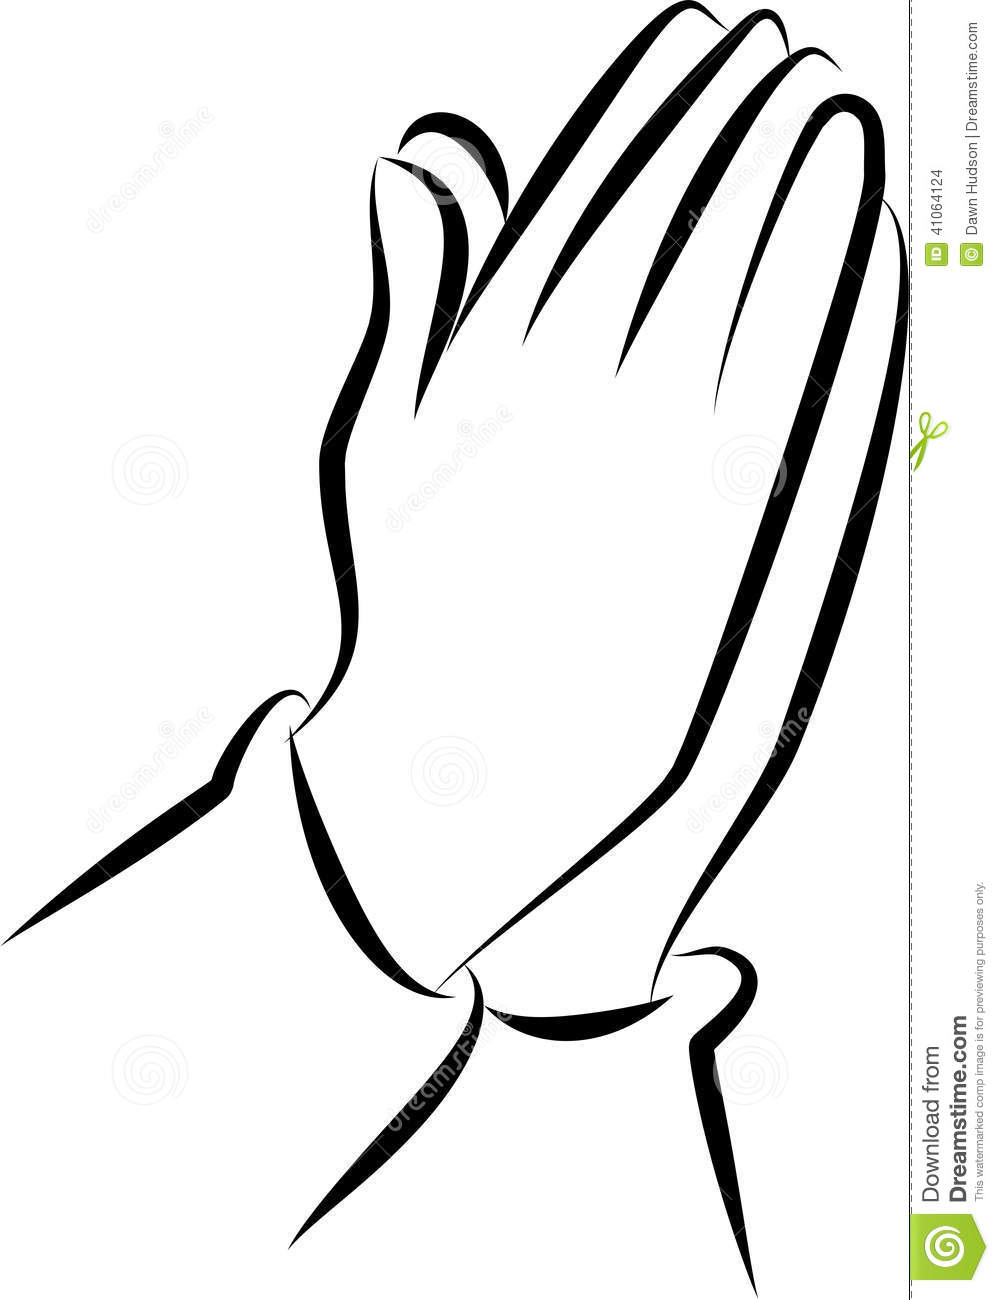 1744 Praying Hands free clipart.